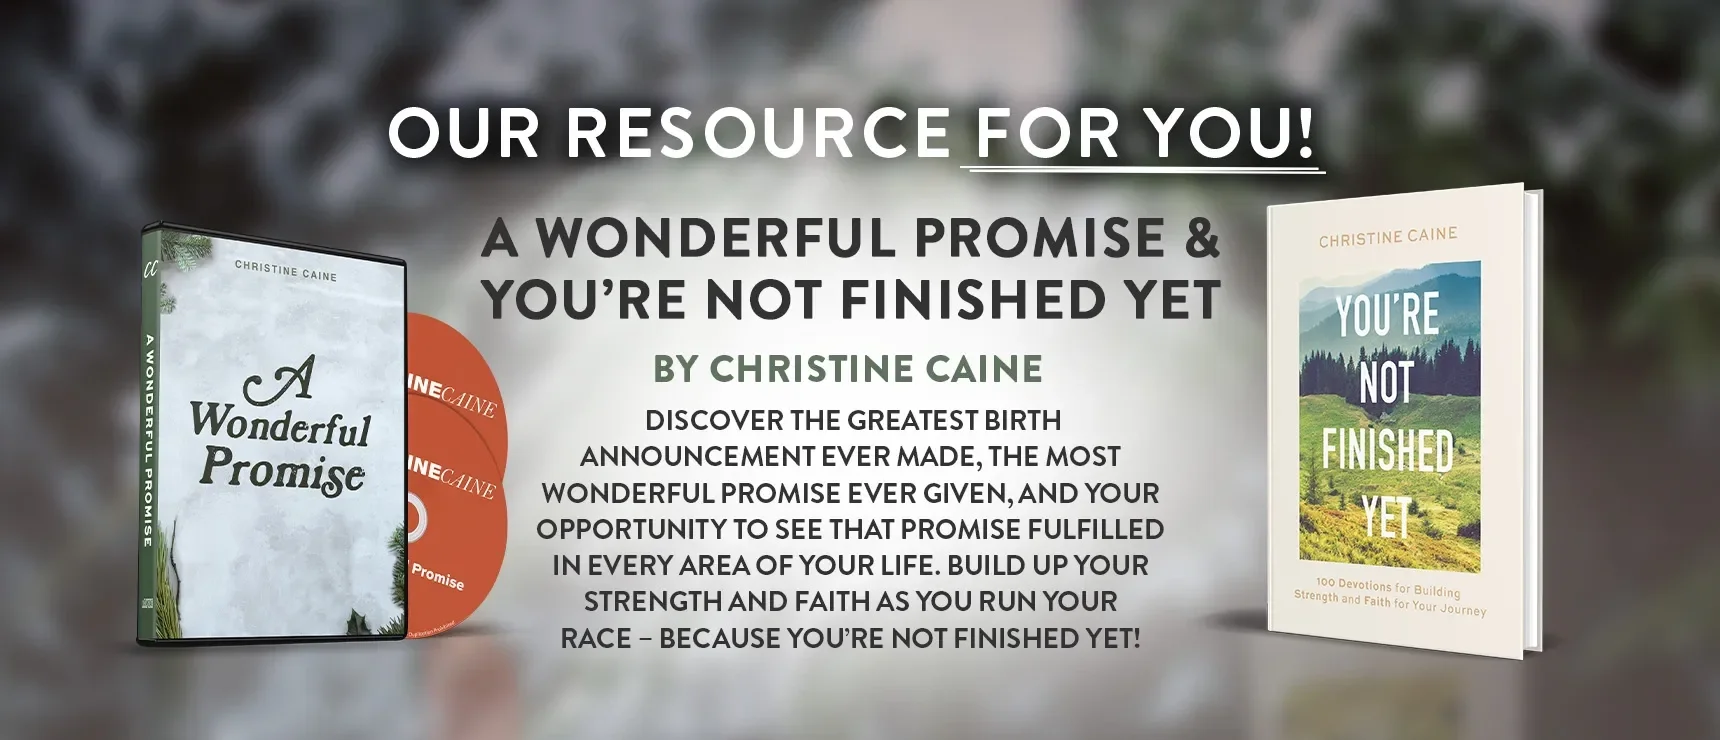 A Wonderful Promise + You're Not Finished Yet by Christine Caine